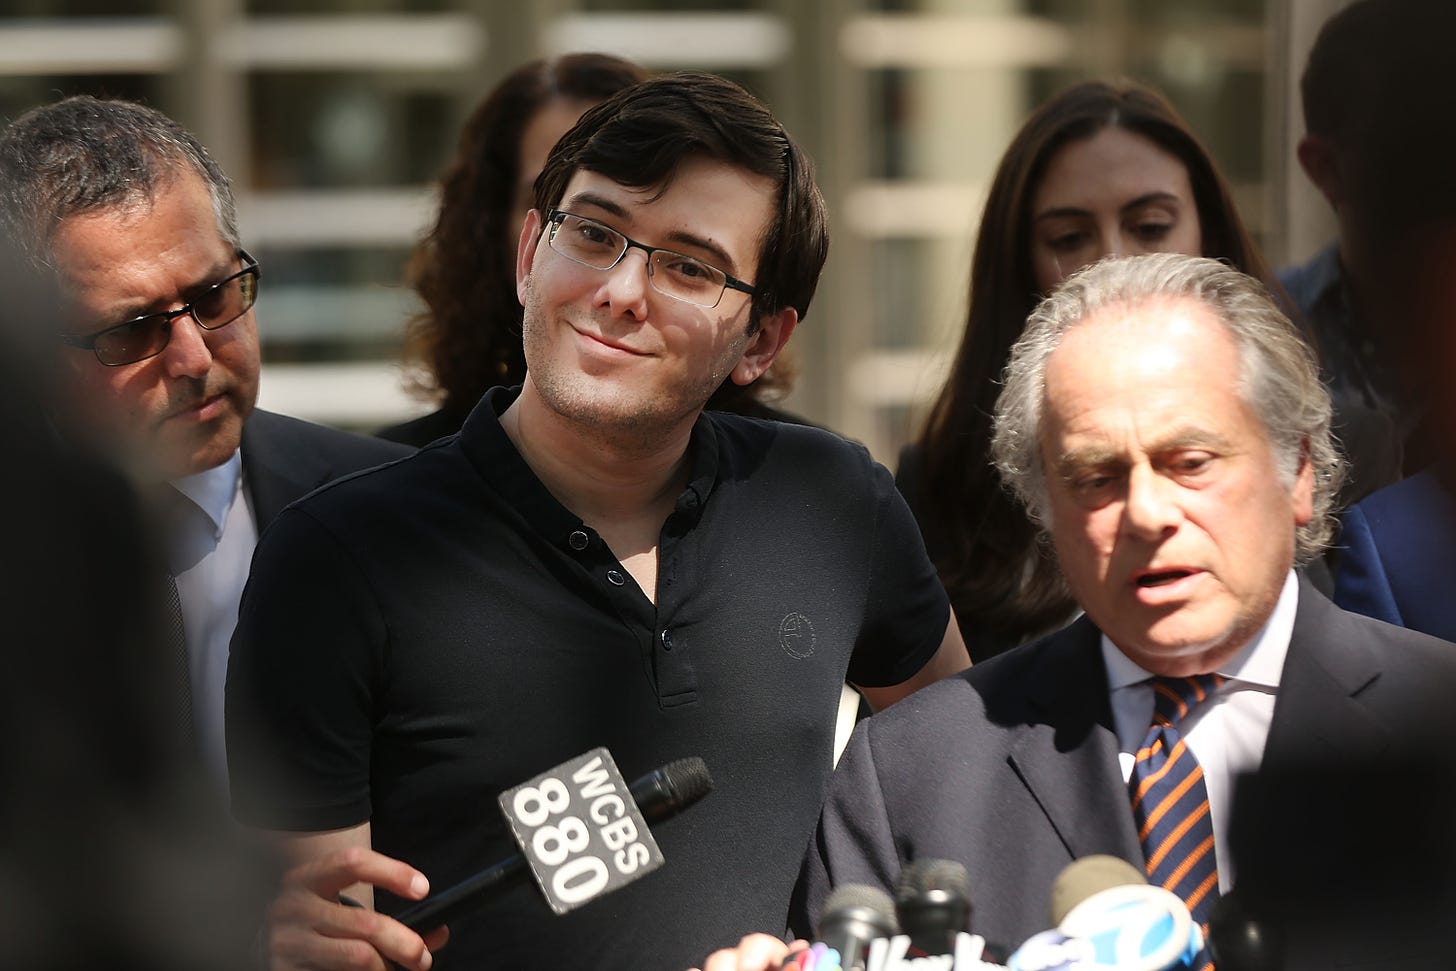 Martin Shkreli outside the courthouse in Brooklyn after his conviction in August 2017. Defense lawyers Marc Agnifilo (left), Benjamin Brafman (right) and Andrea Zellan and Teny Geragos (behind) also pictured. (Getty Images)